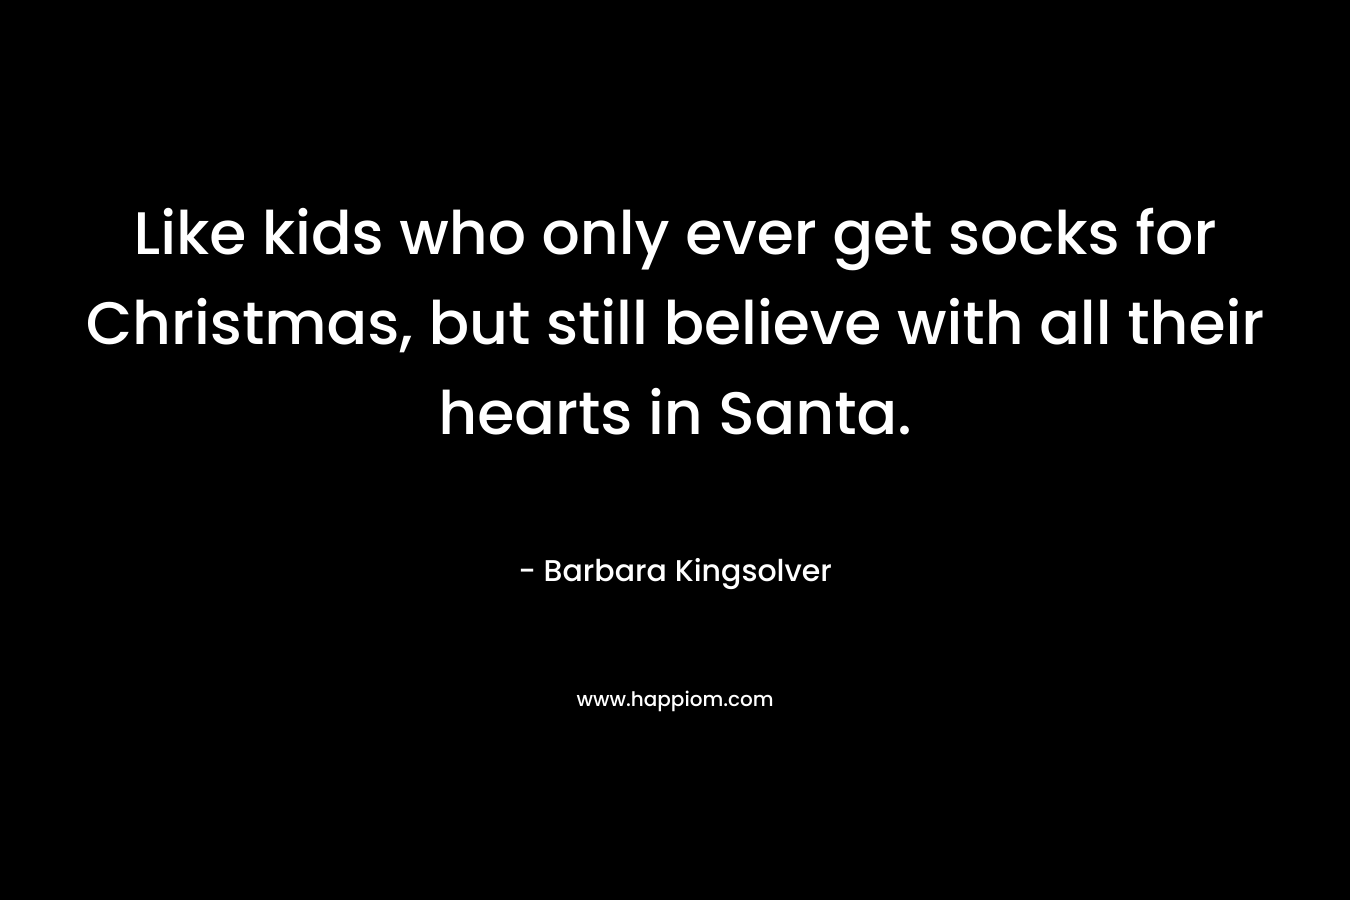 Like kids who only ever get socks for Christmas, but still believe with all their hearts in Santa. – Barbara Kingsolver